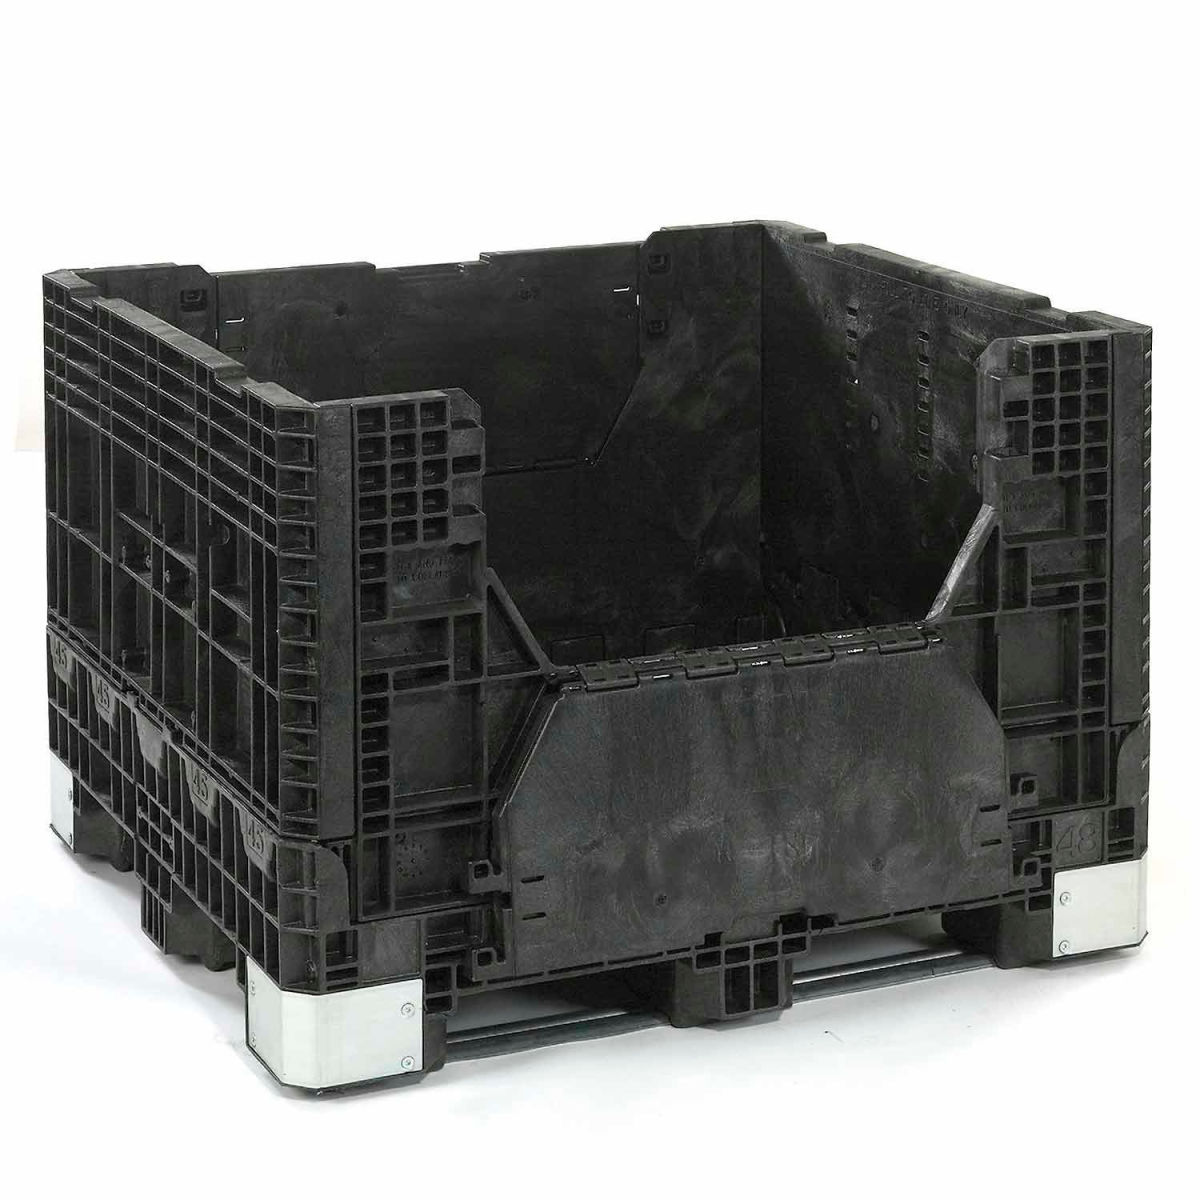 Picture of Akro-Mils 4598700 2500 lbs Buckhorn BH4840342010000 Folding Bulk Container - Black - 48 x 40 x 34 in.